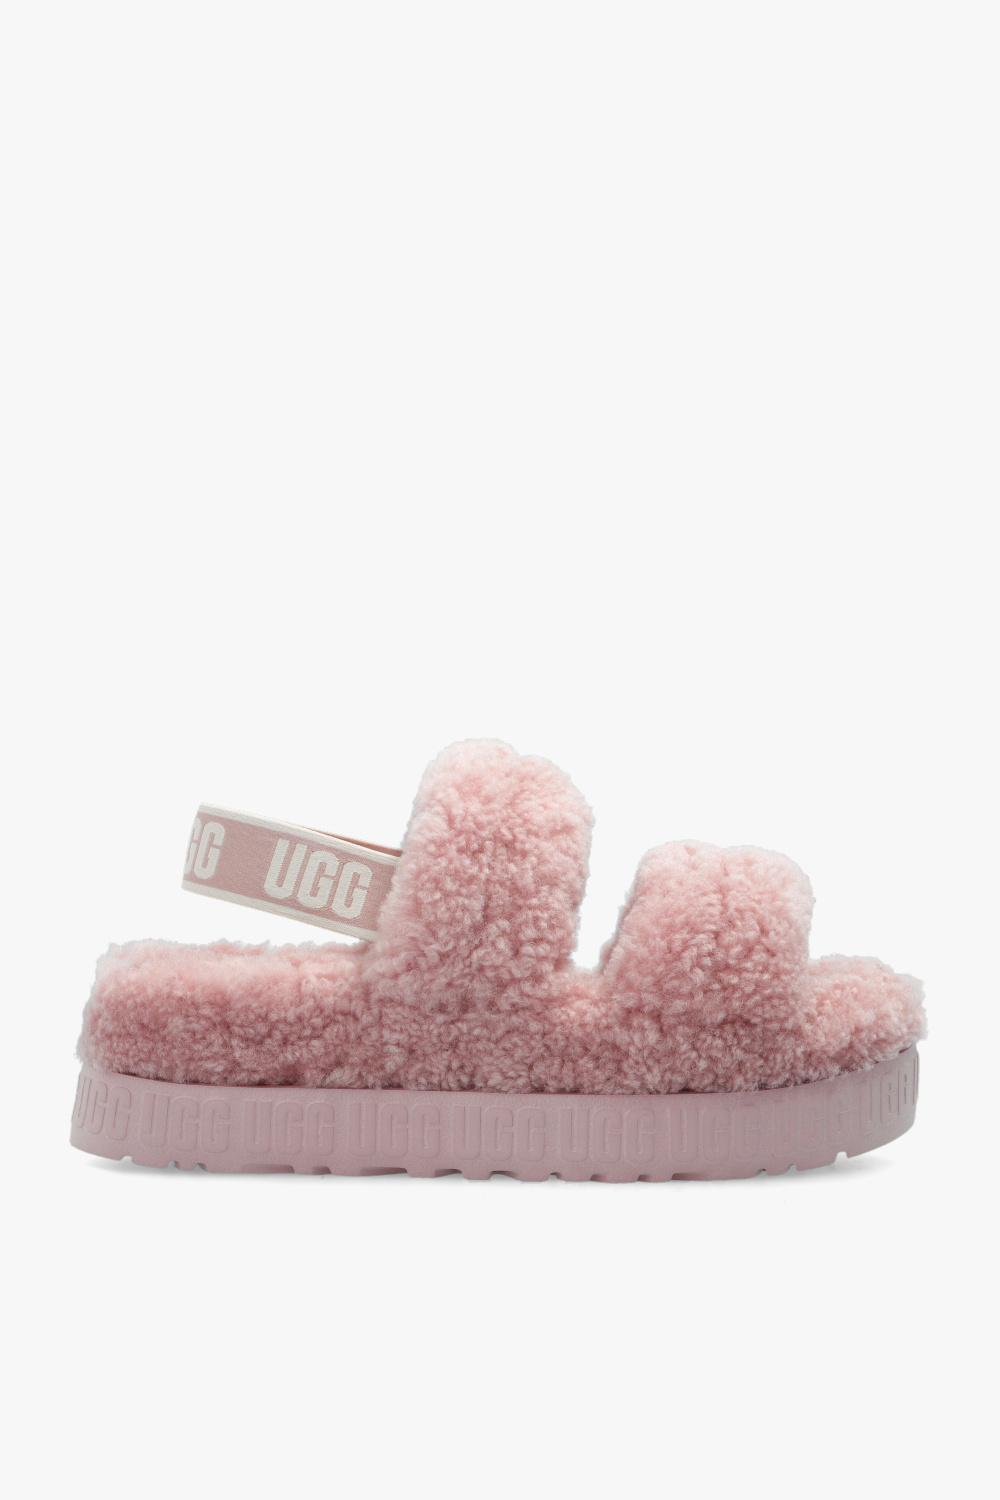 UGG 'oh Fluffita' Fur Sandals in Pink | Lyst